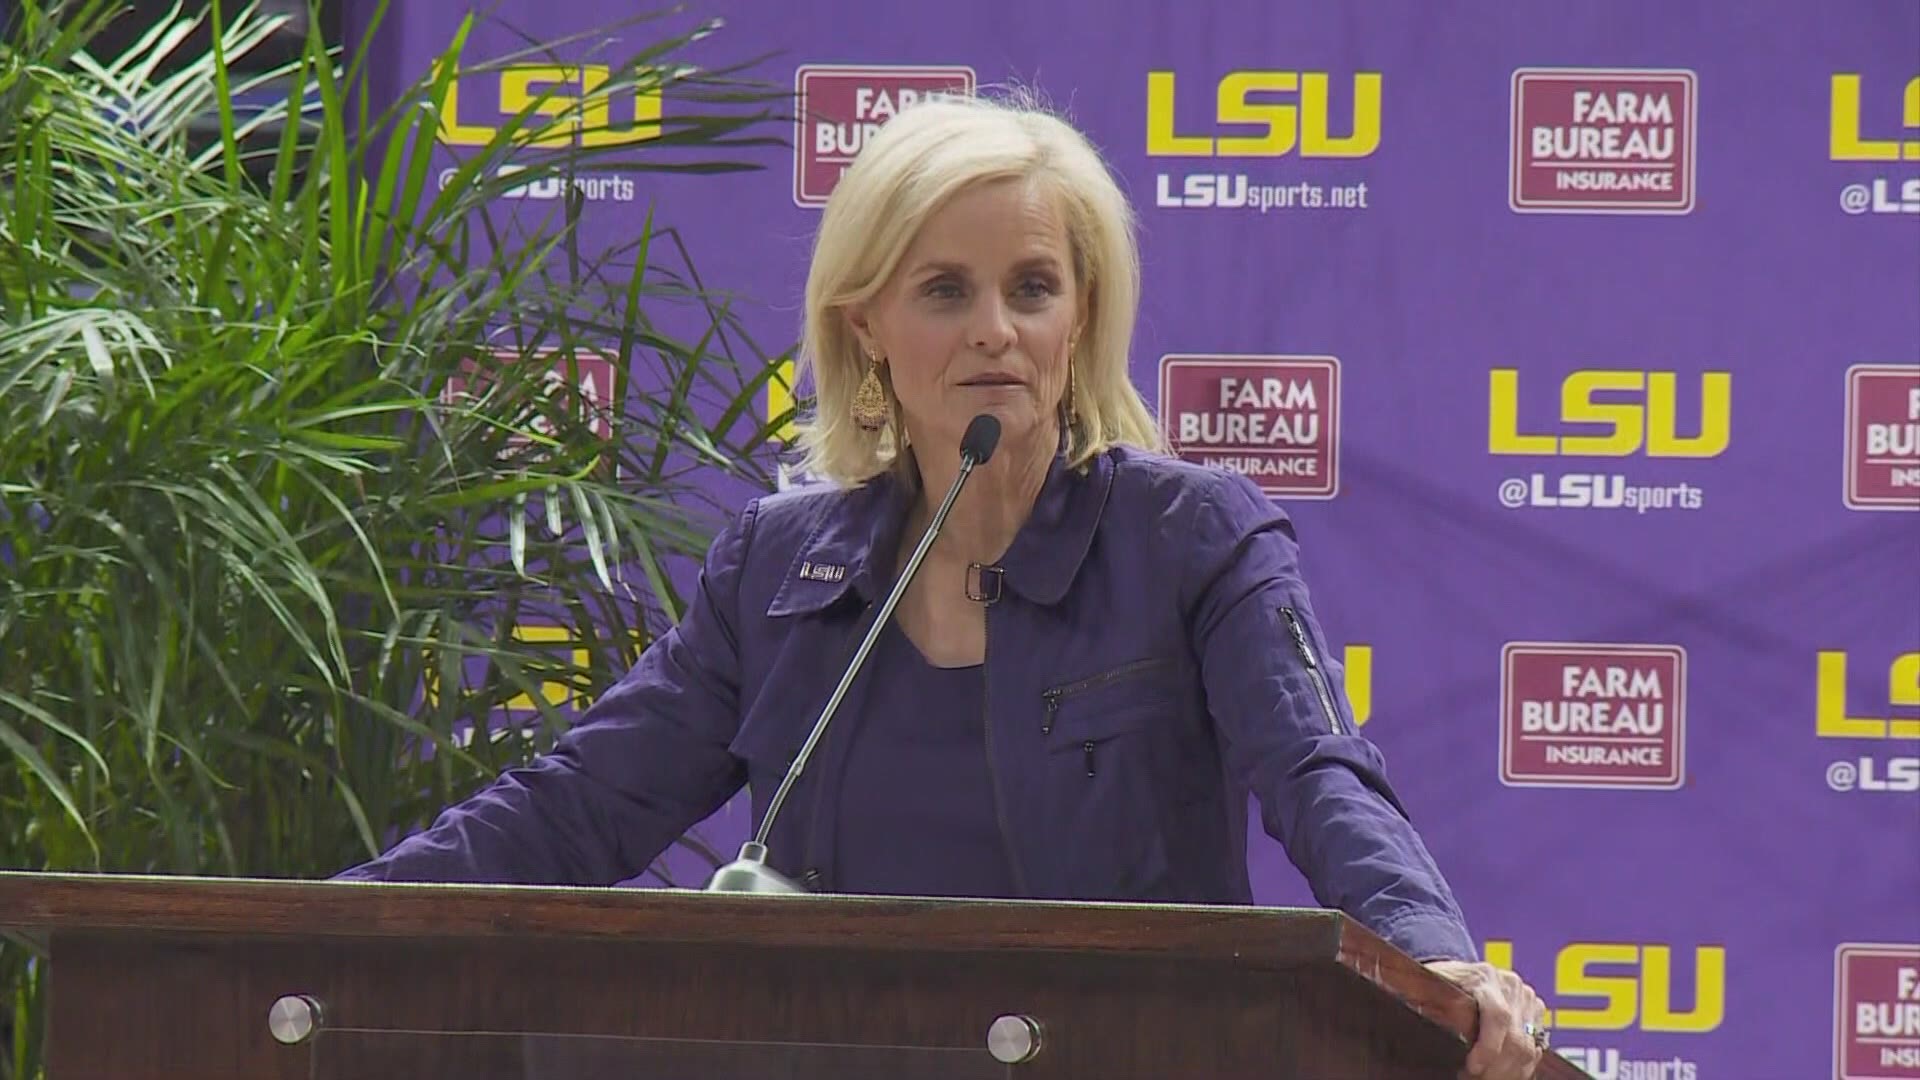 Head coach Kim Mulkey made it clear during her introductory press conference that she's back home in Louisiana for one reason: To win championships.